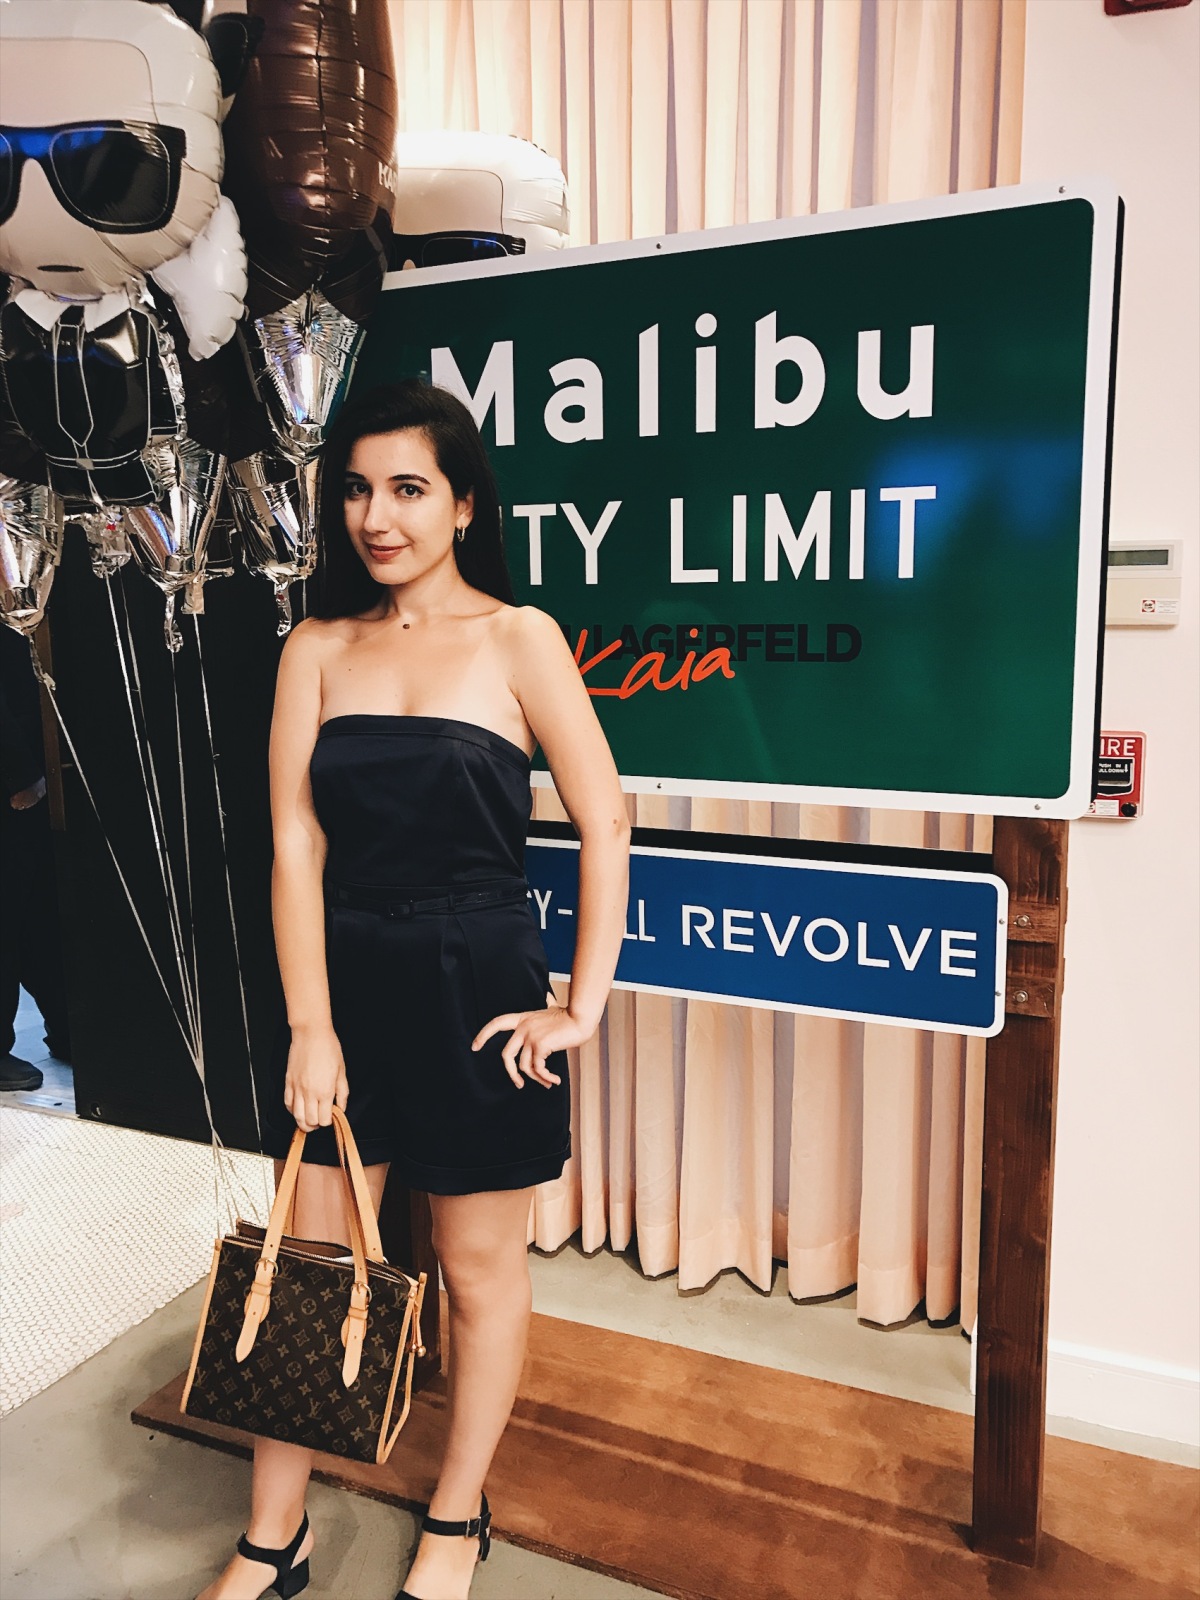 fashion, style, lifestyle, lookbook, outfit of the day, ootd, lotd, look of the day, fashion blogger, style blogger, fashion events, fashion exhibits, Revolve, Karl x Kaia Gerber Launch event, Revolve Social Club, fashion influencer